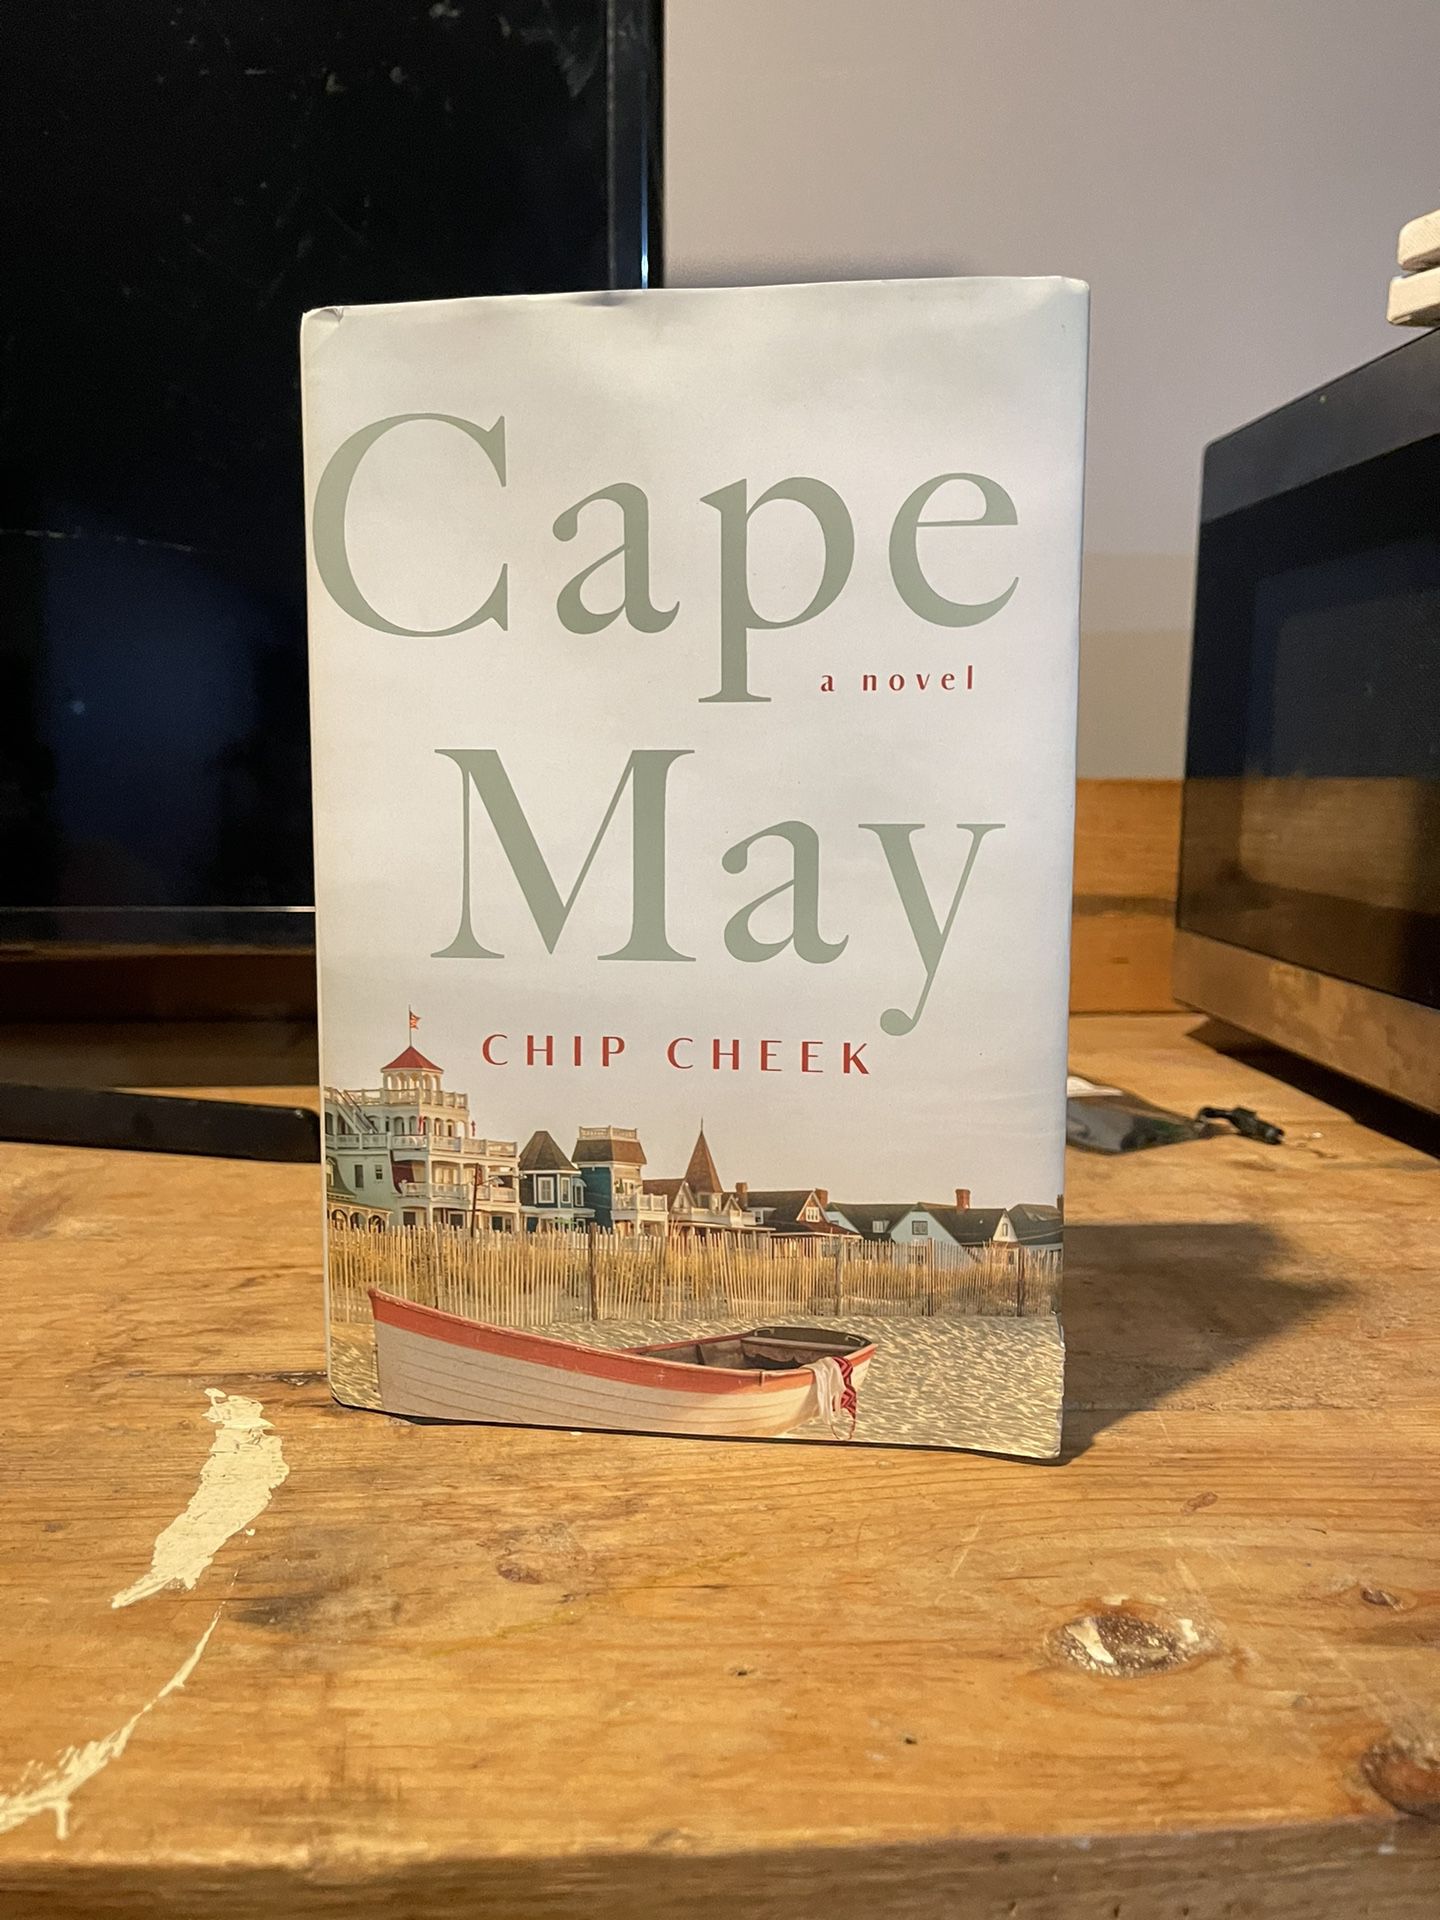 Book: Cape May